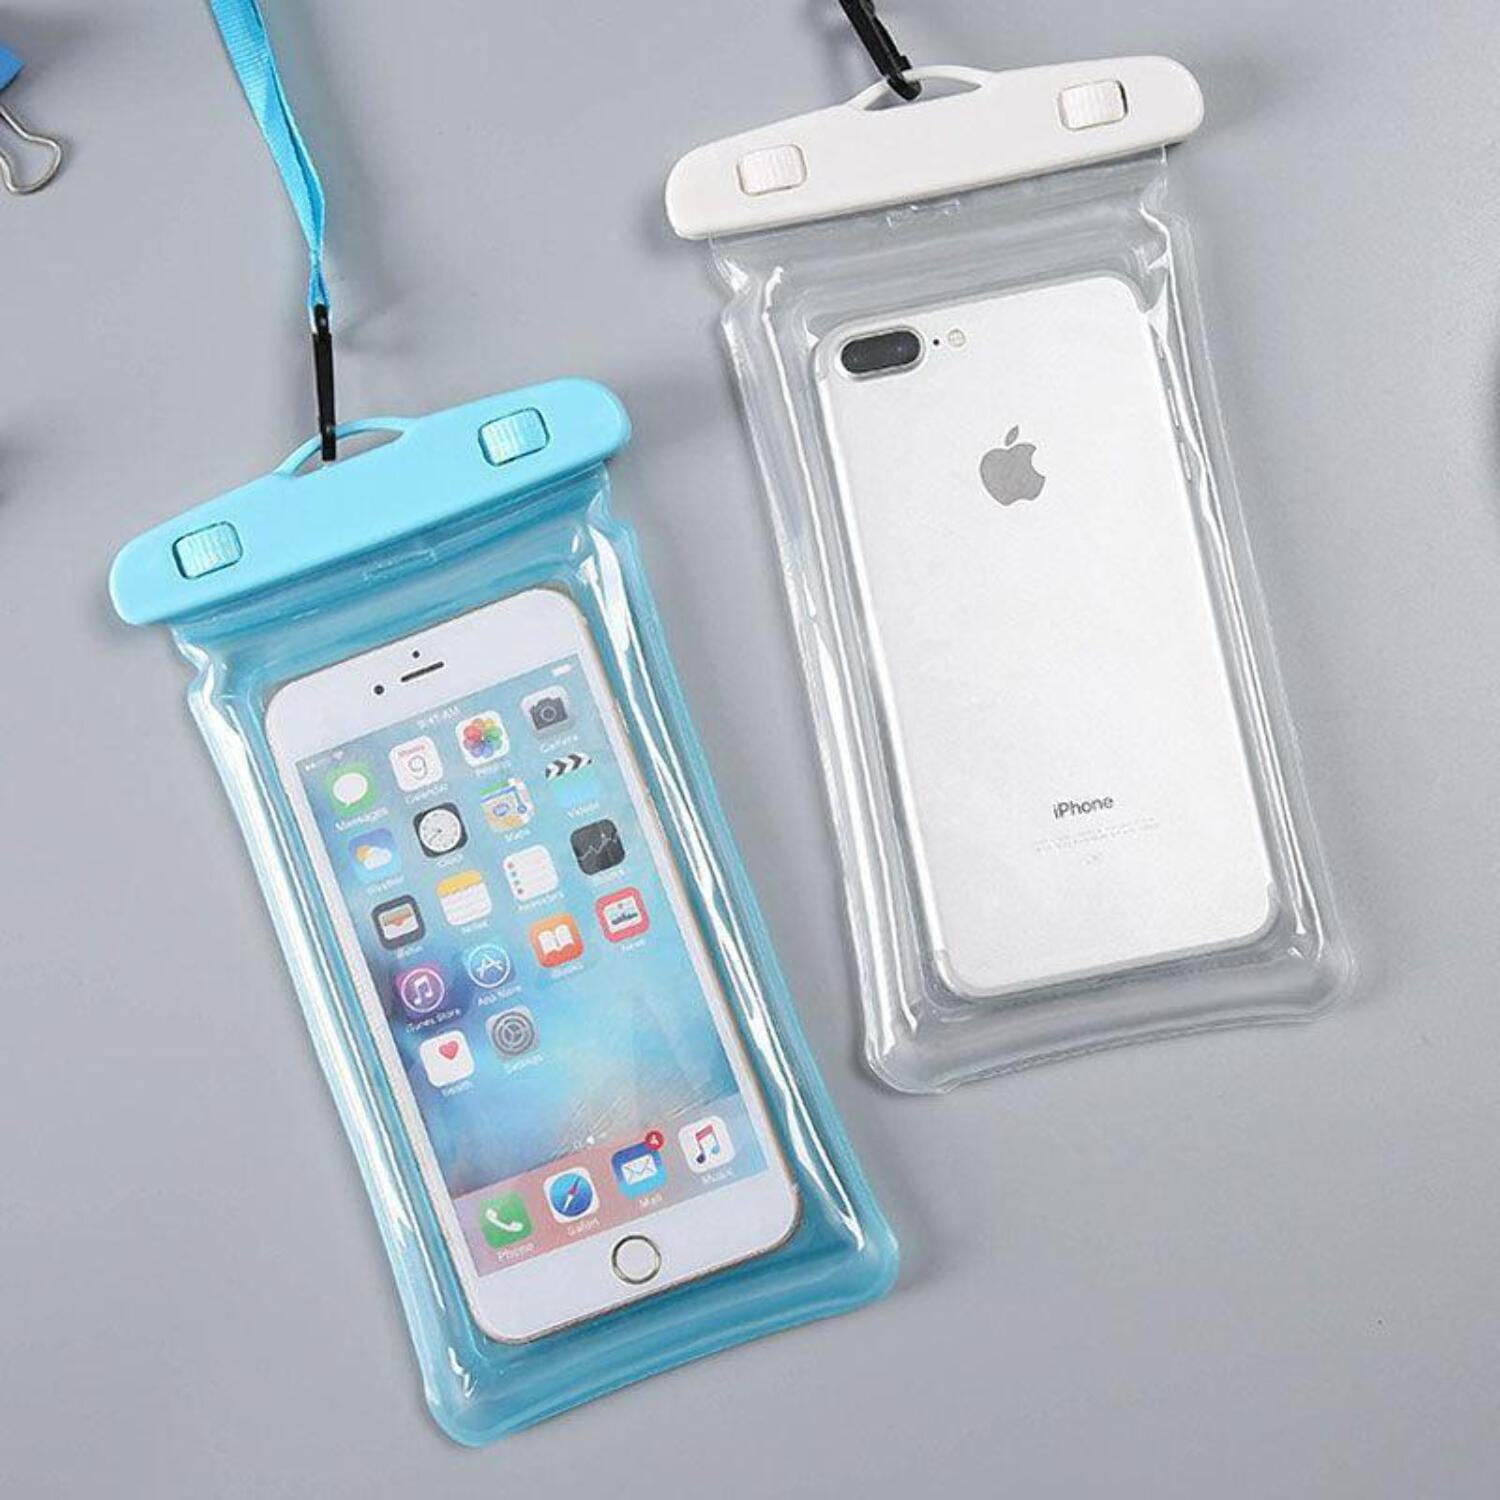 Waterproof Cell Phone Pouch Universal Dry Bag Case with Neck Lanyard ...